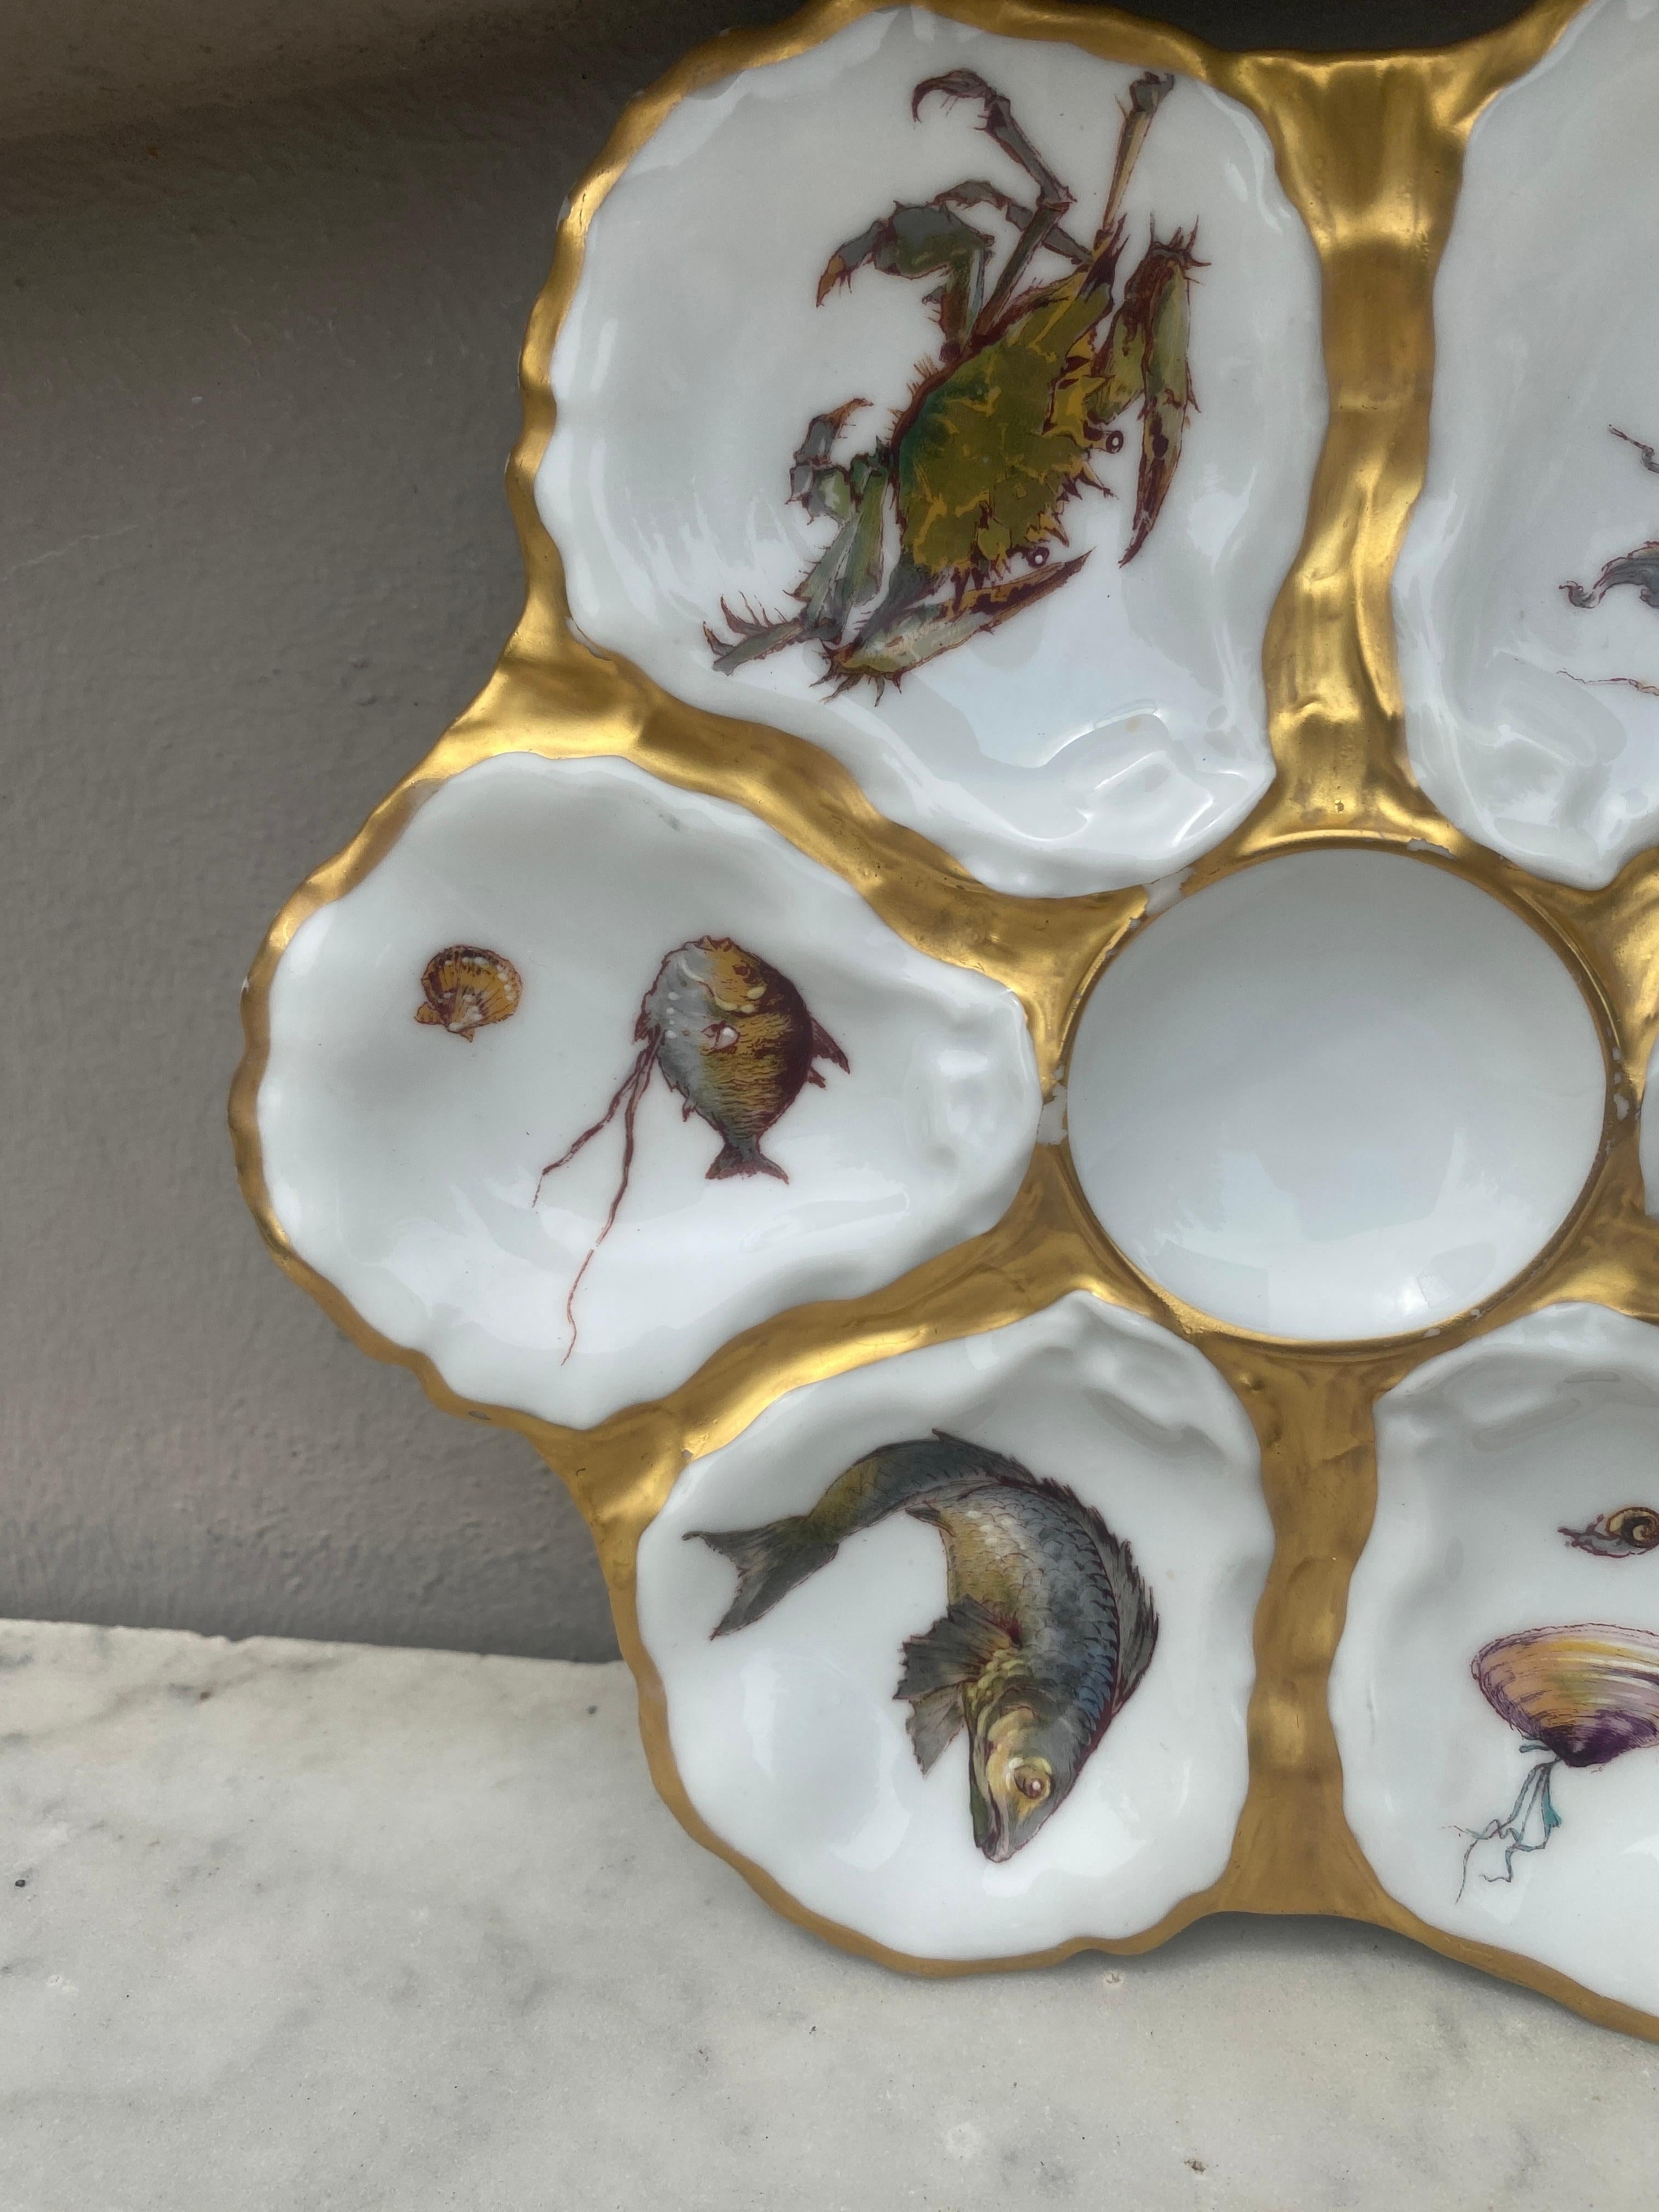 Antique 19th-century French porcelain oyster plate with sealife pattern (shells, seaweeds, fish) signed Limoges Haviland & C.